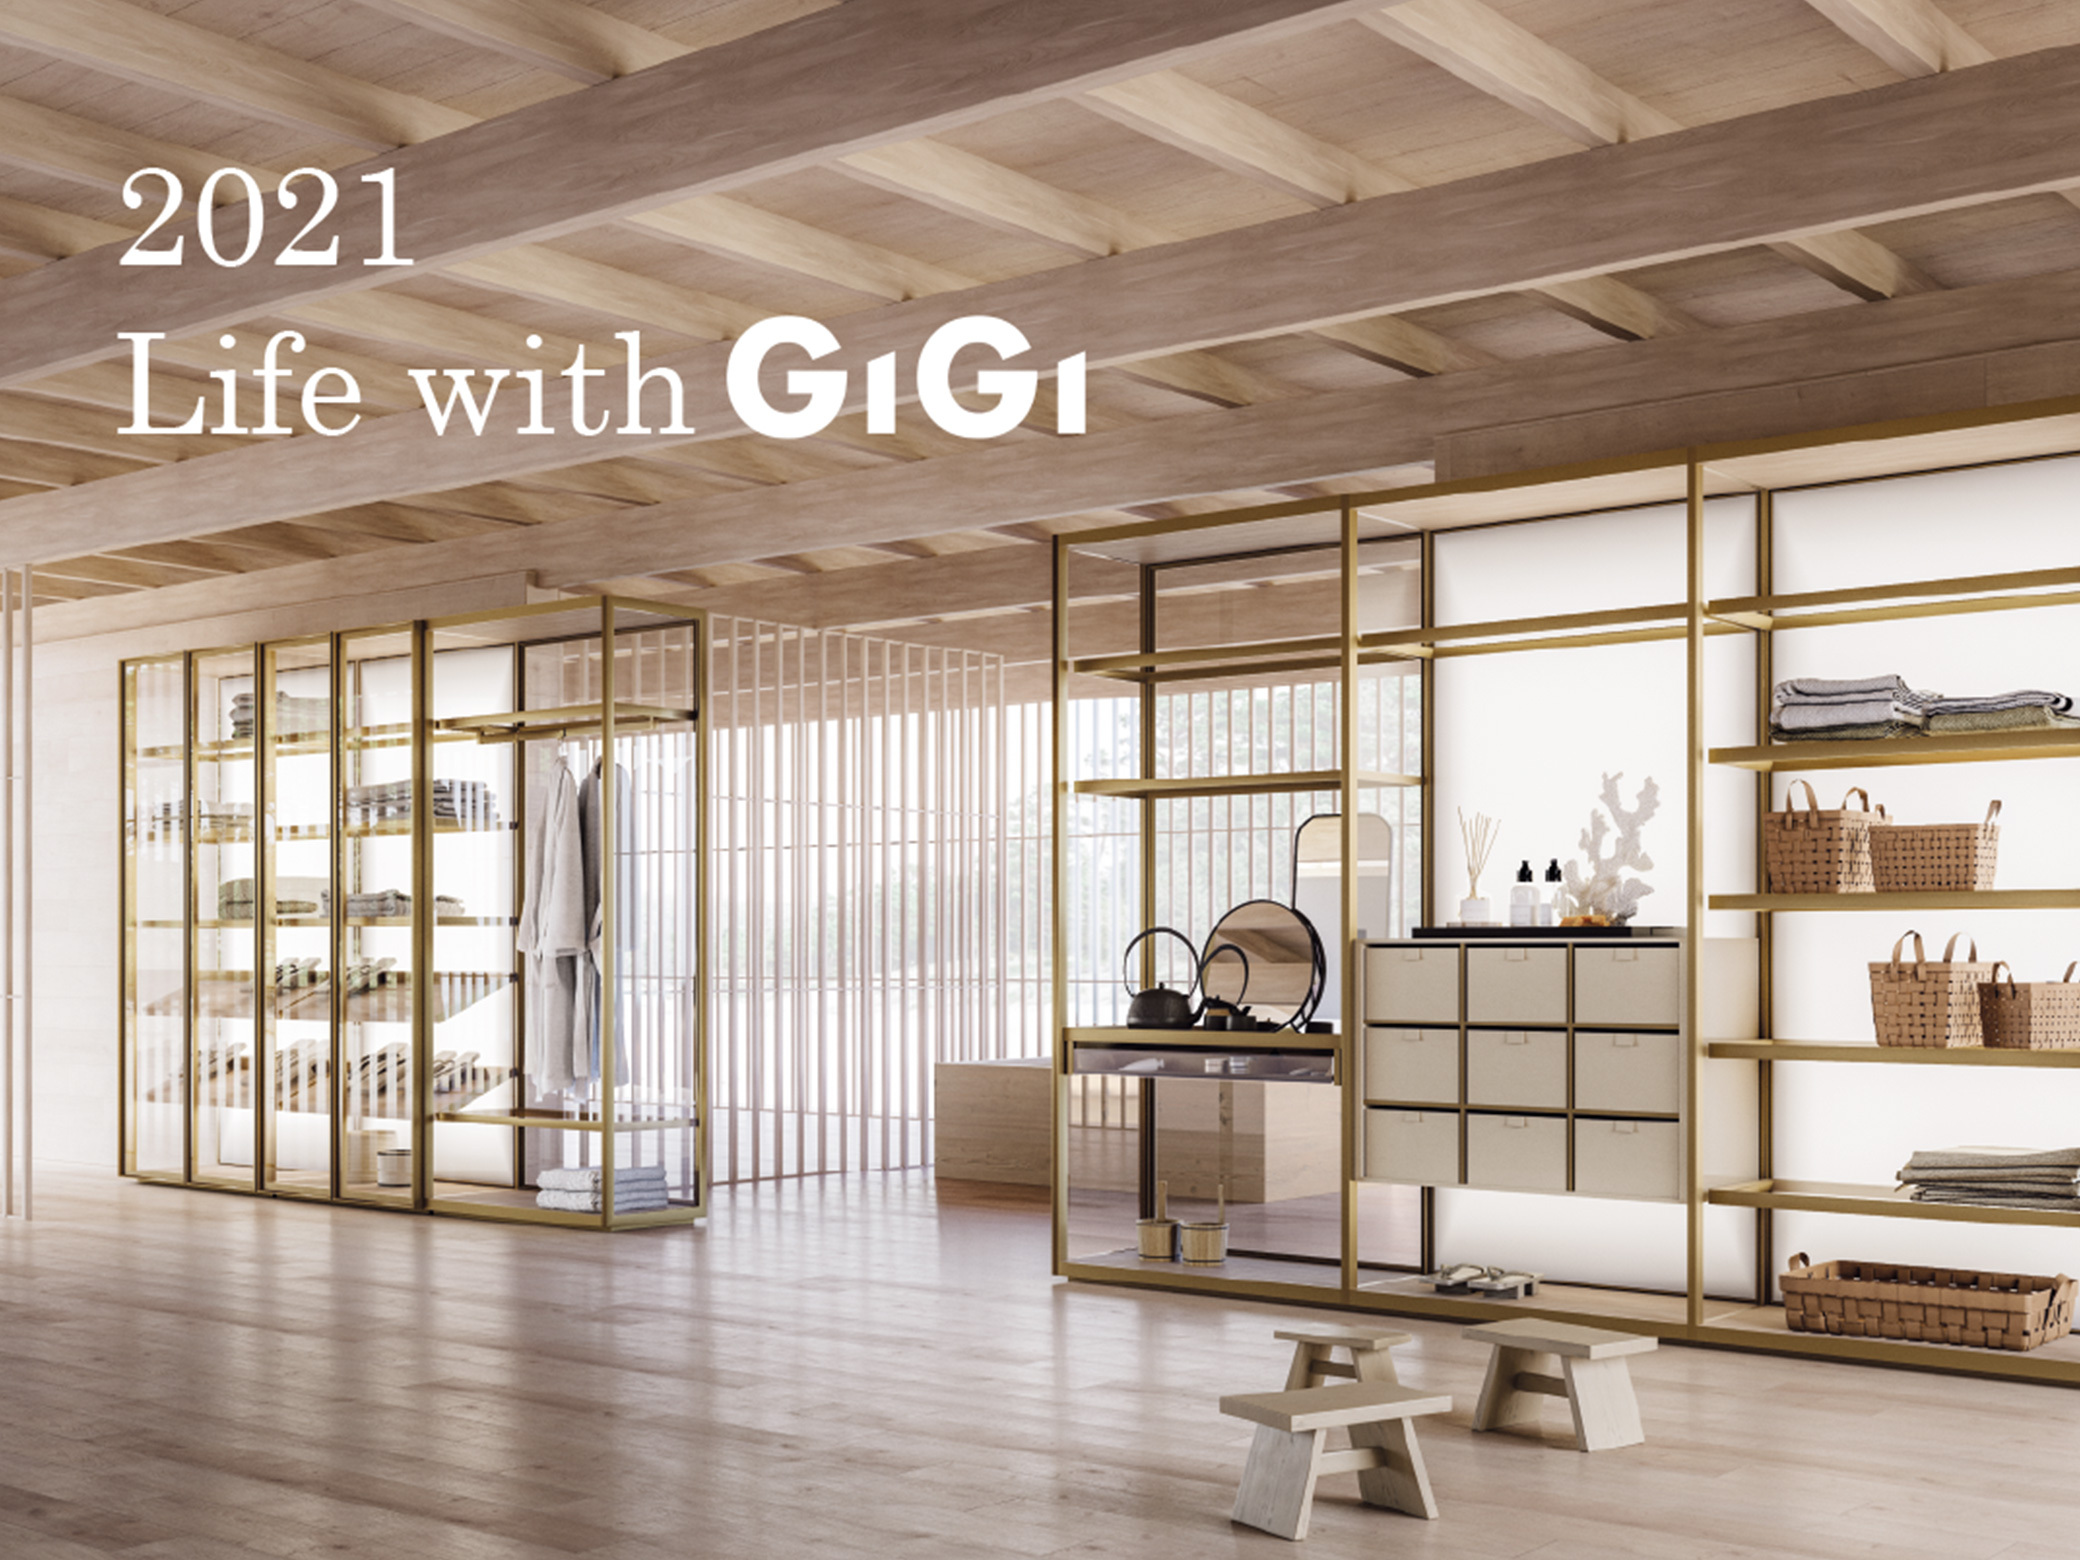 Elevate your lifestyle with GiGi in 2021